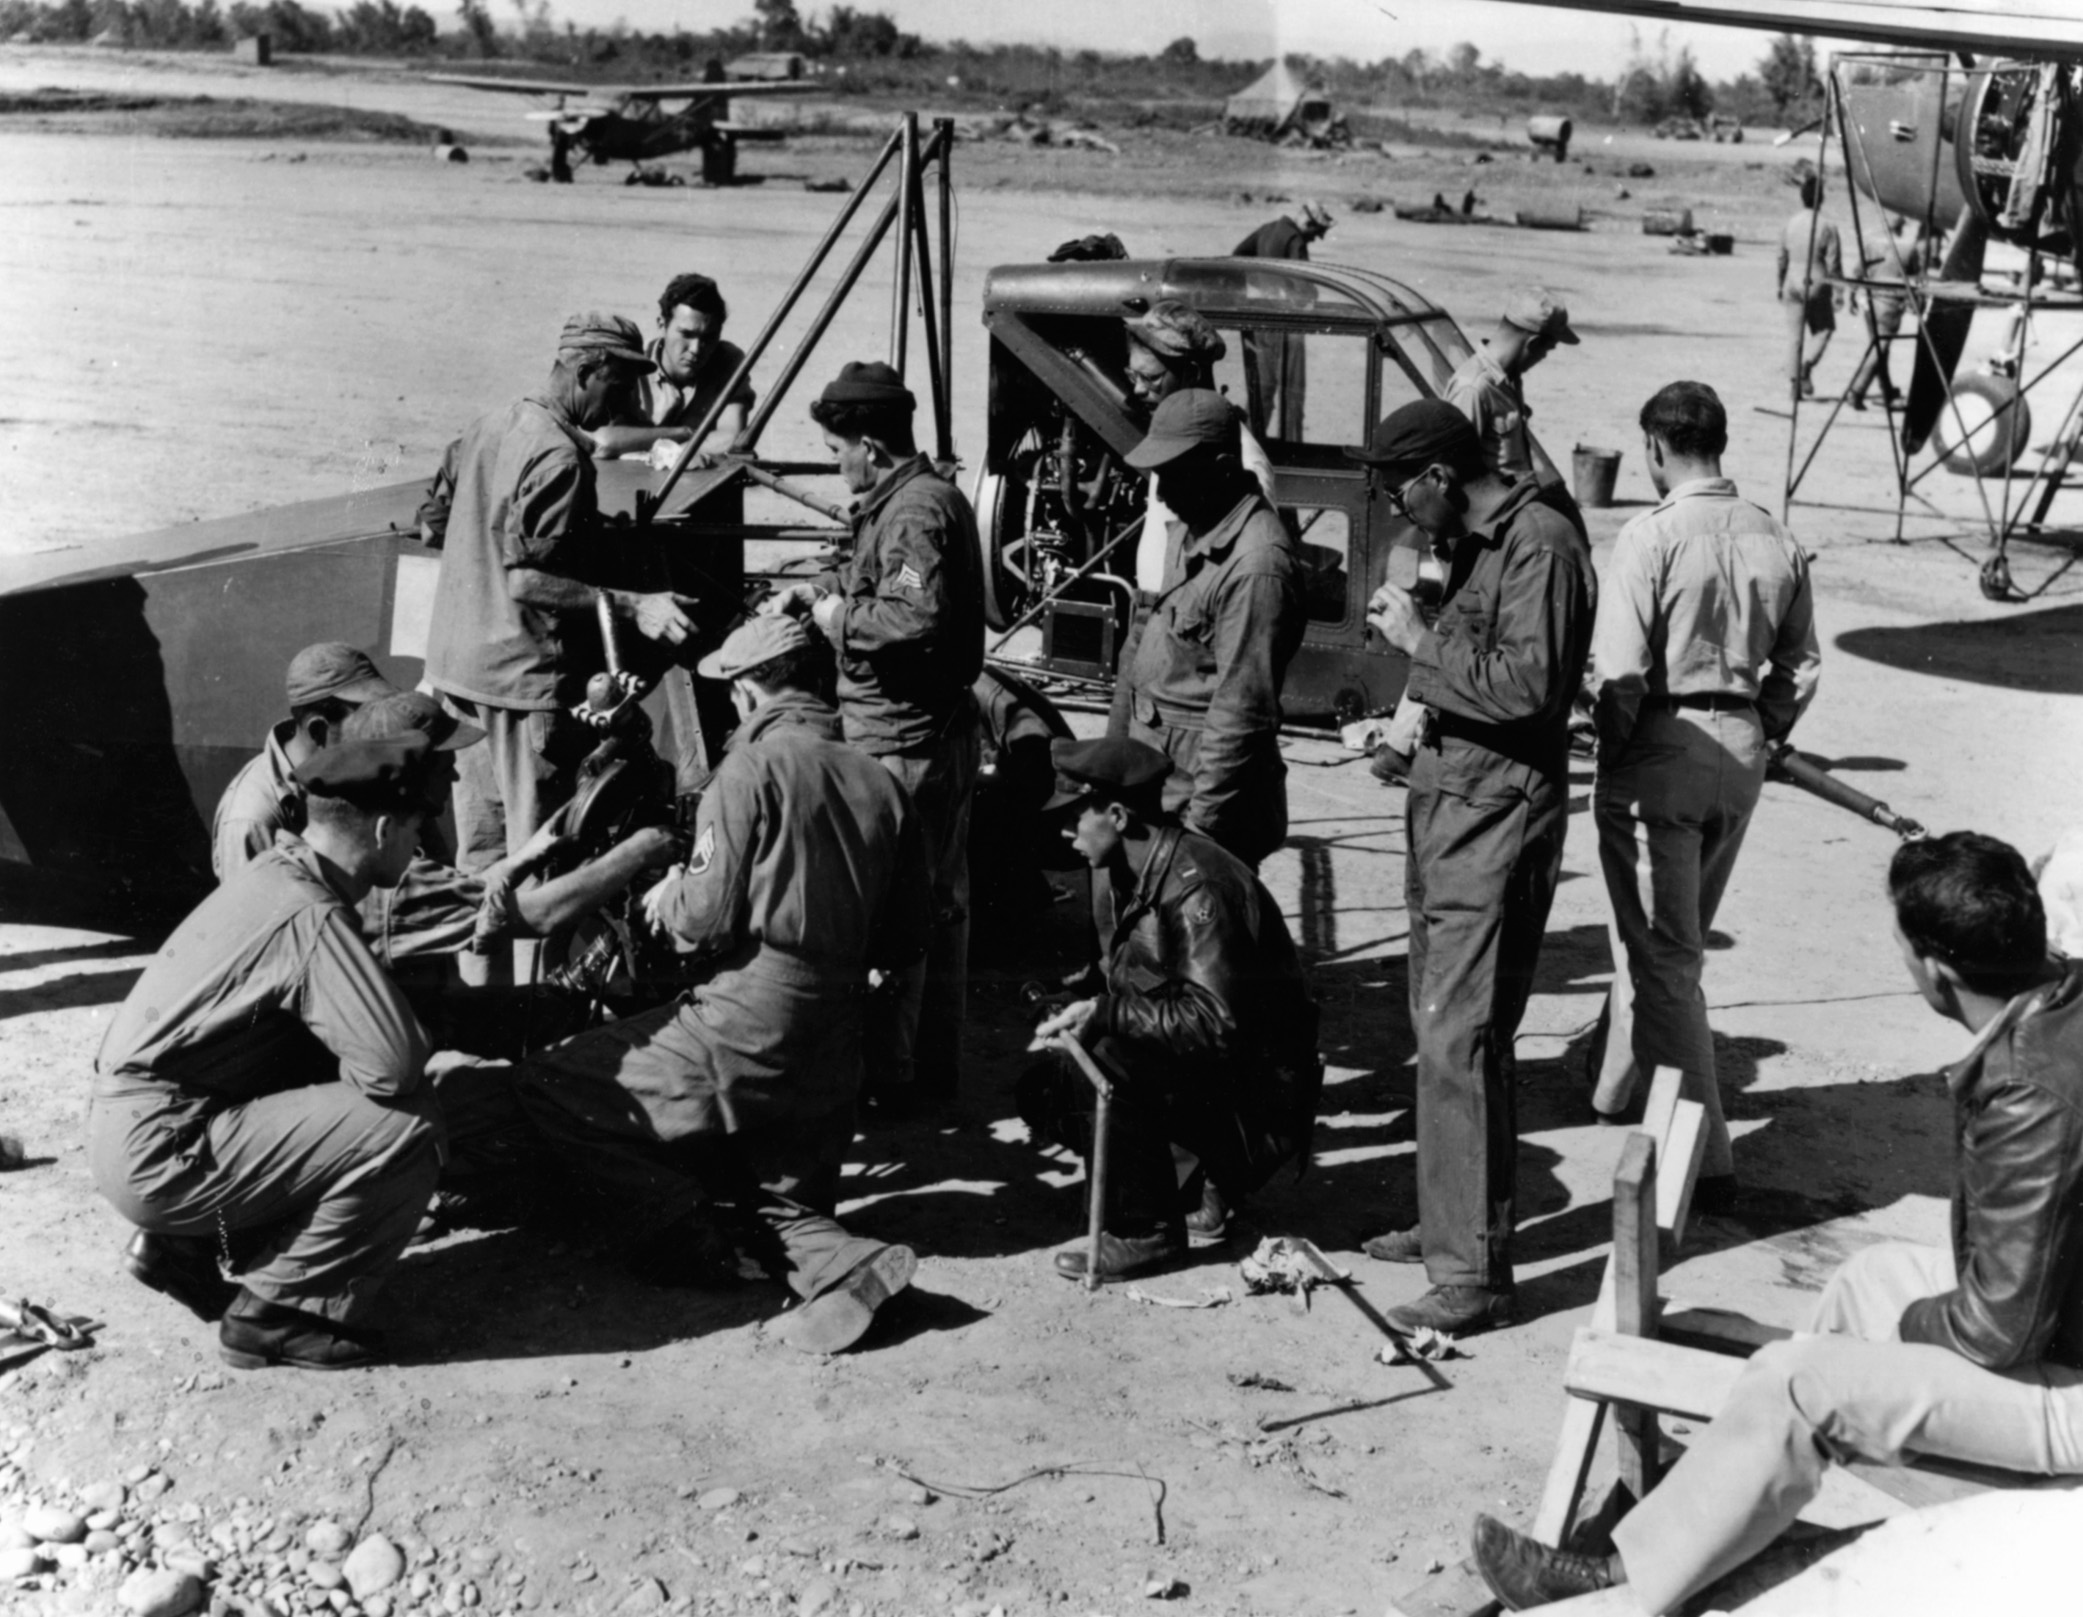 A group of mechanics assemble YR-4B helicopters in the China-Burma-India Theater. An L-5 Sentinel previously used for rescue missions sits in the background.